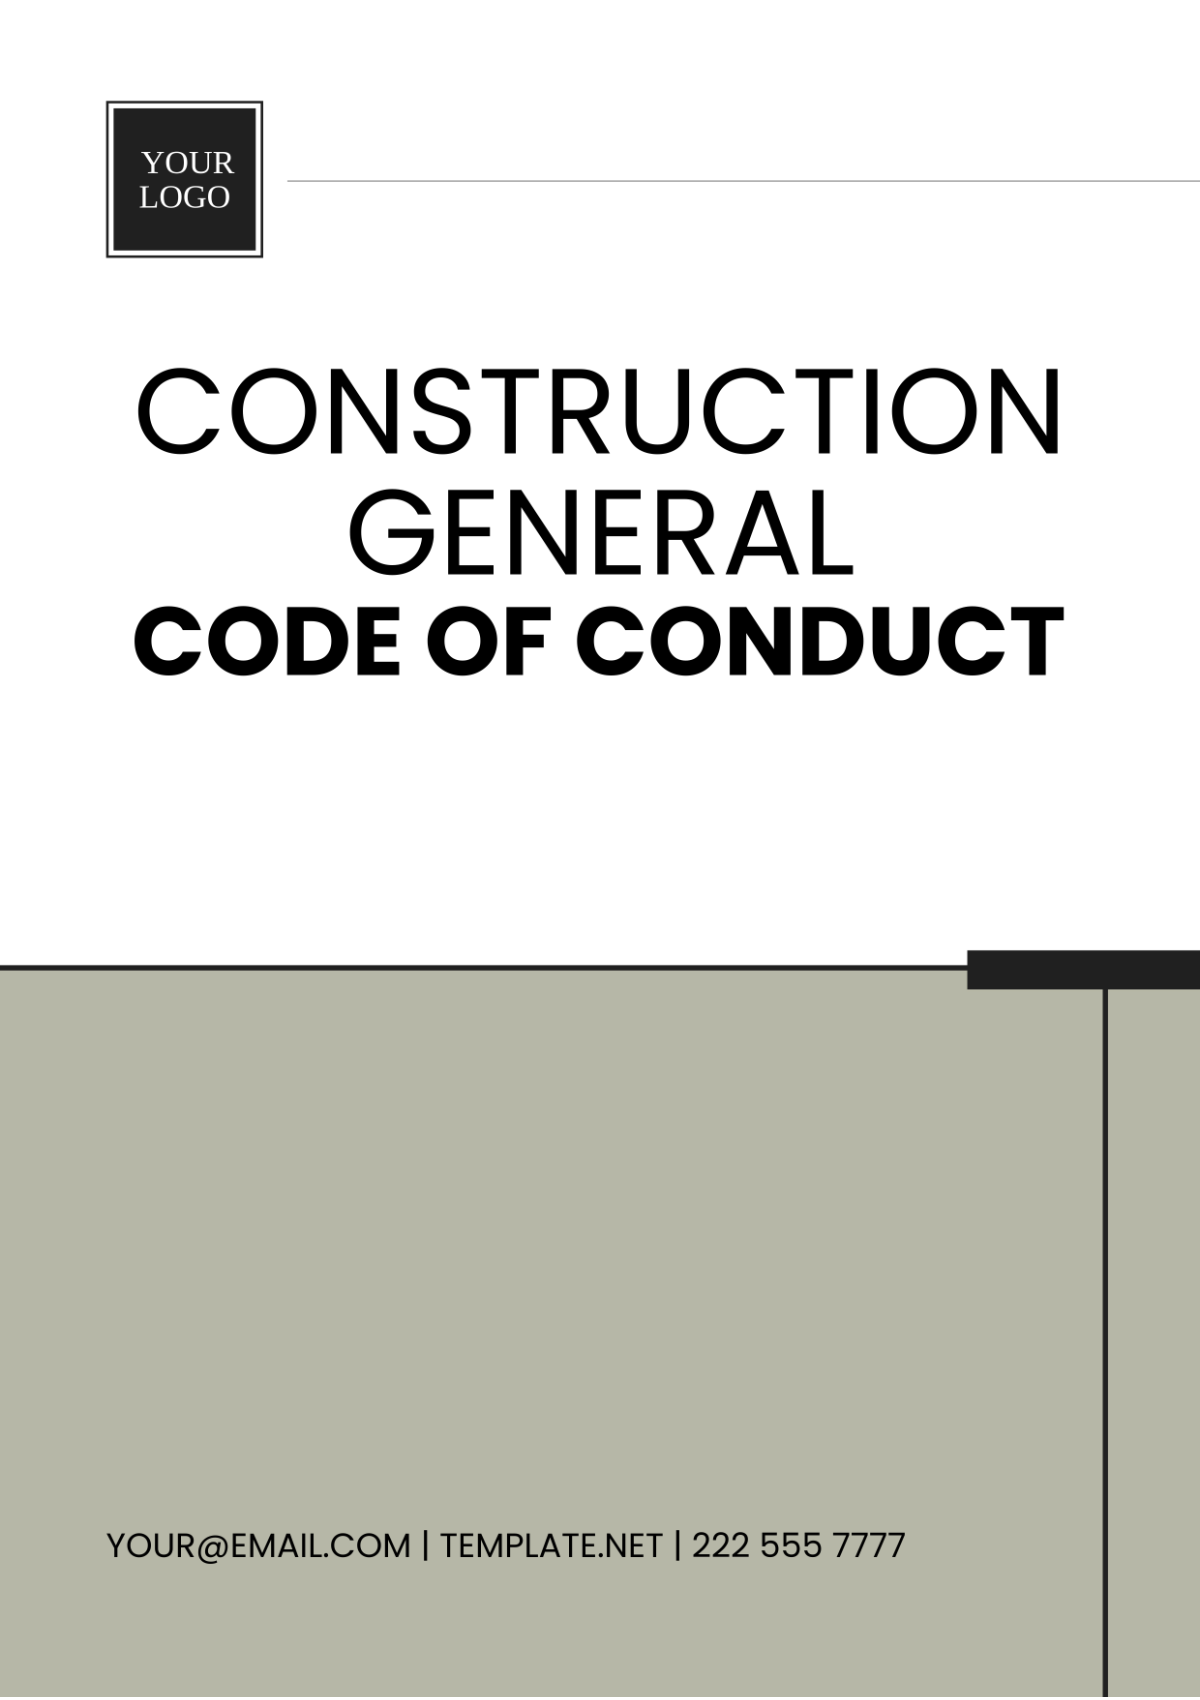 Construction General Code of Conduct Template